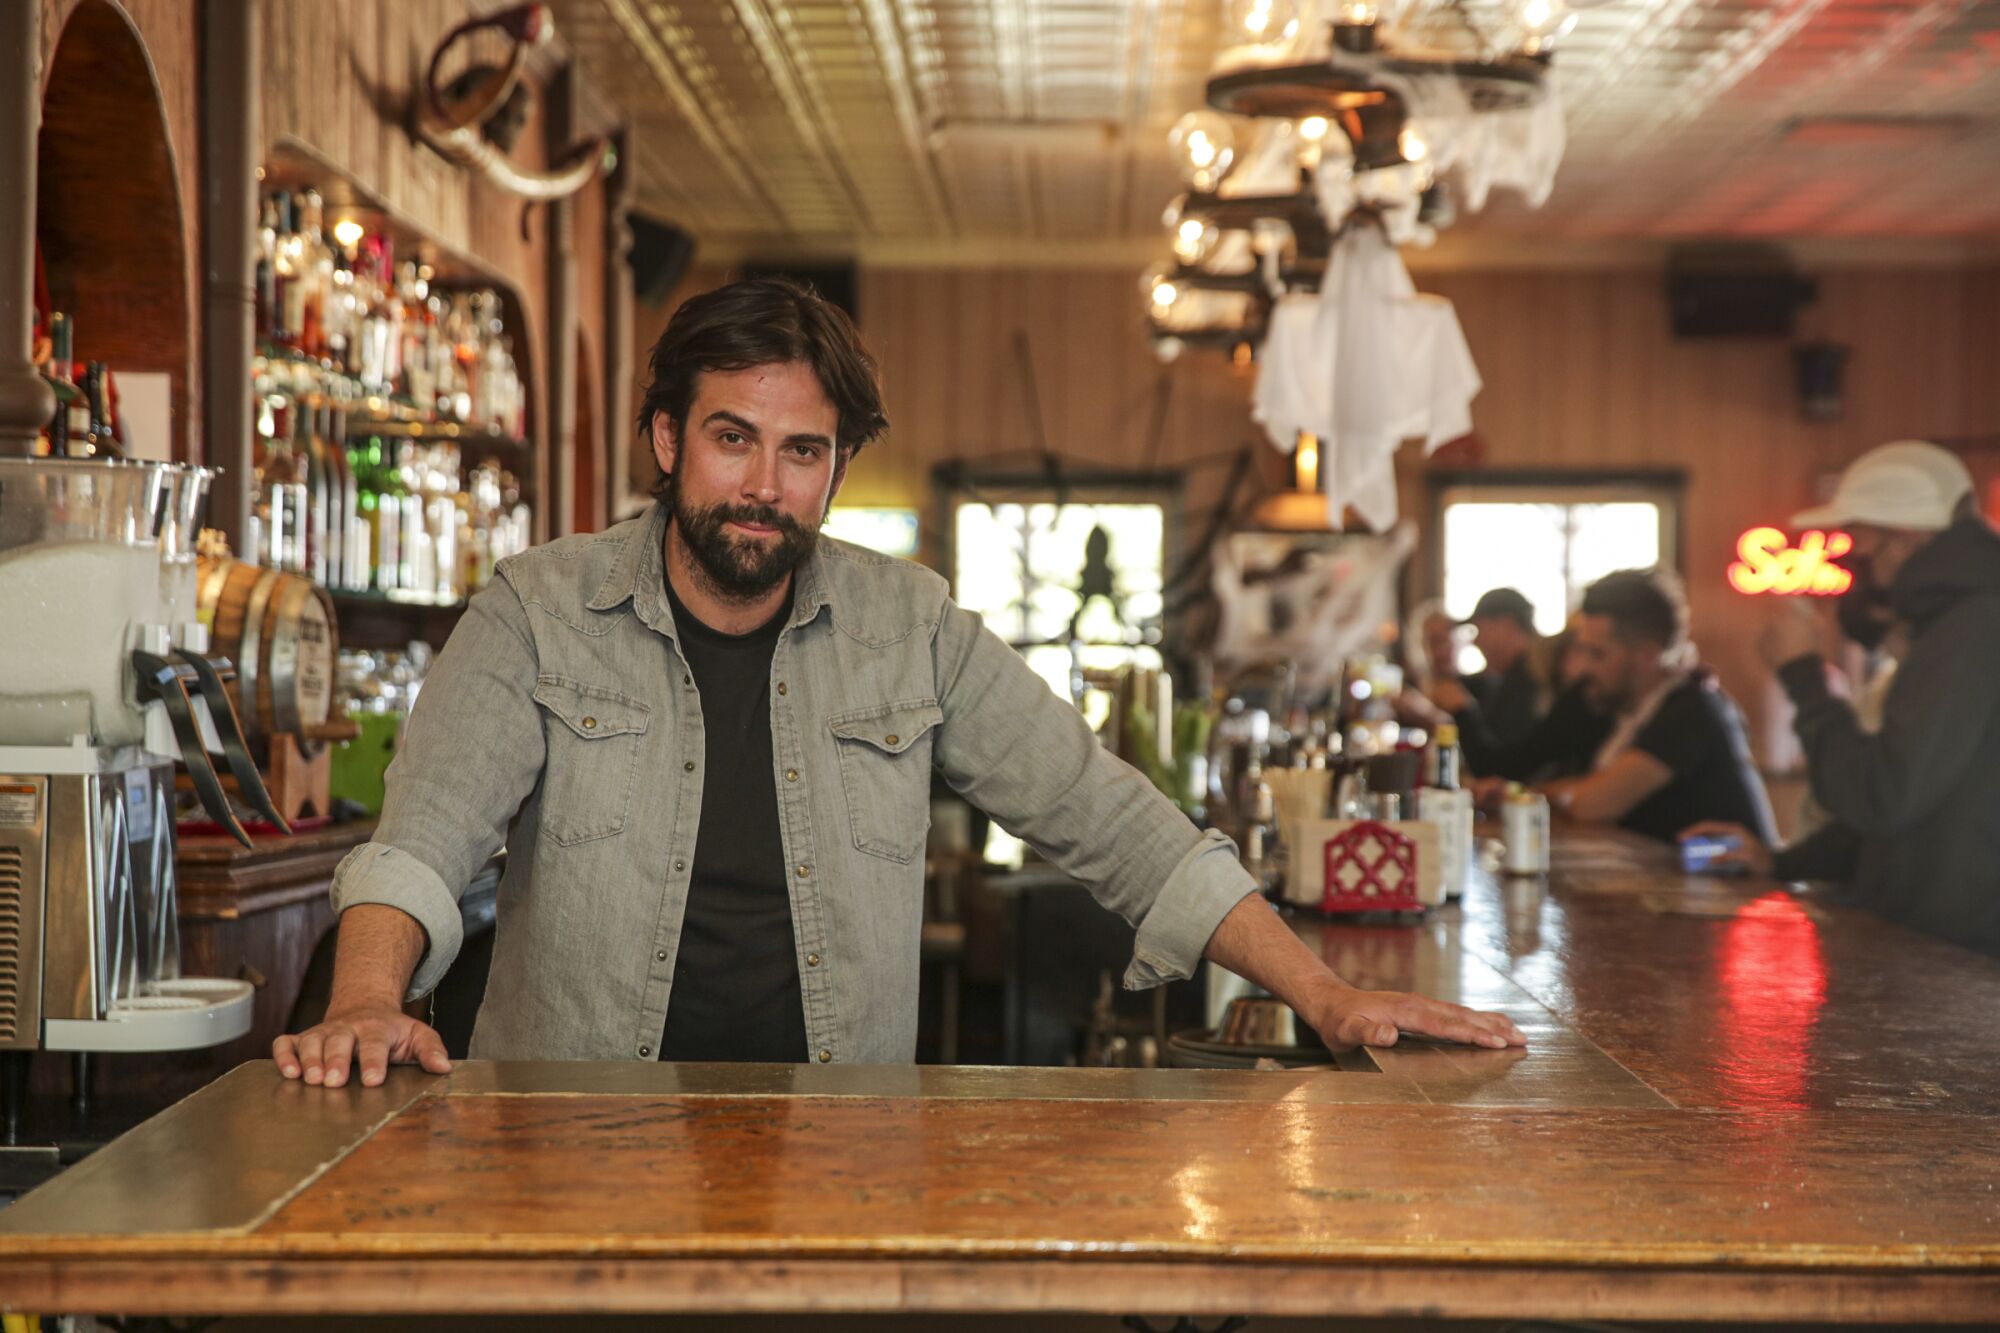 Jean Michel Alperin helped to revitalize the historic Red Dog Saloon in Pioneertown, which reopened in August 2020.